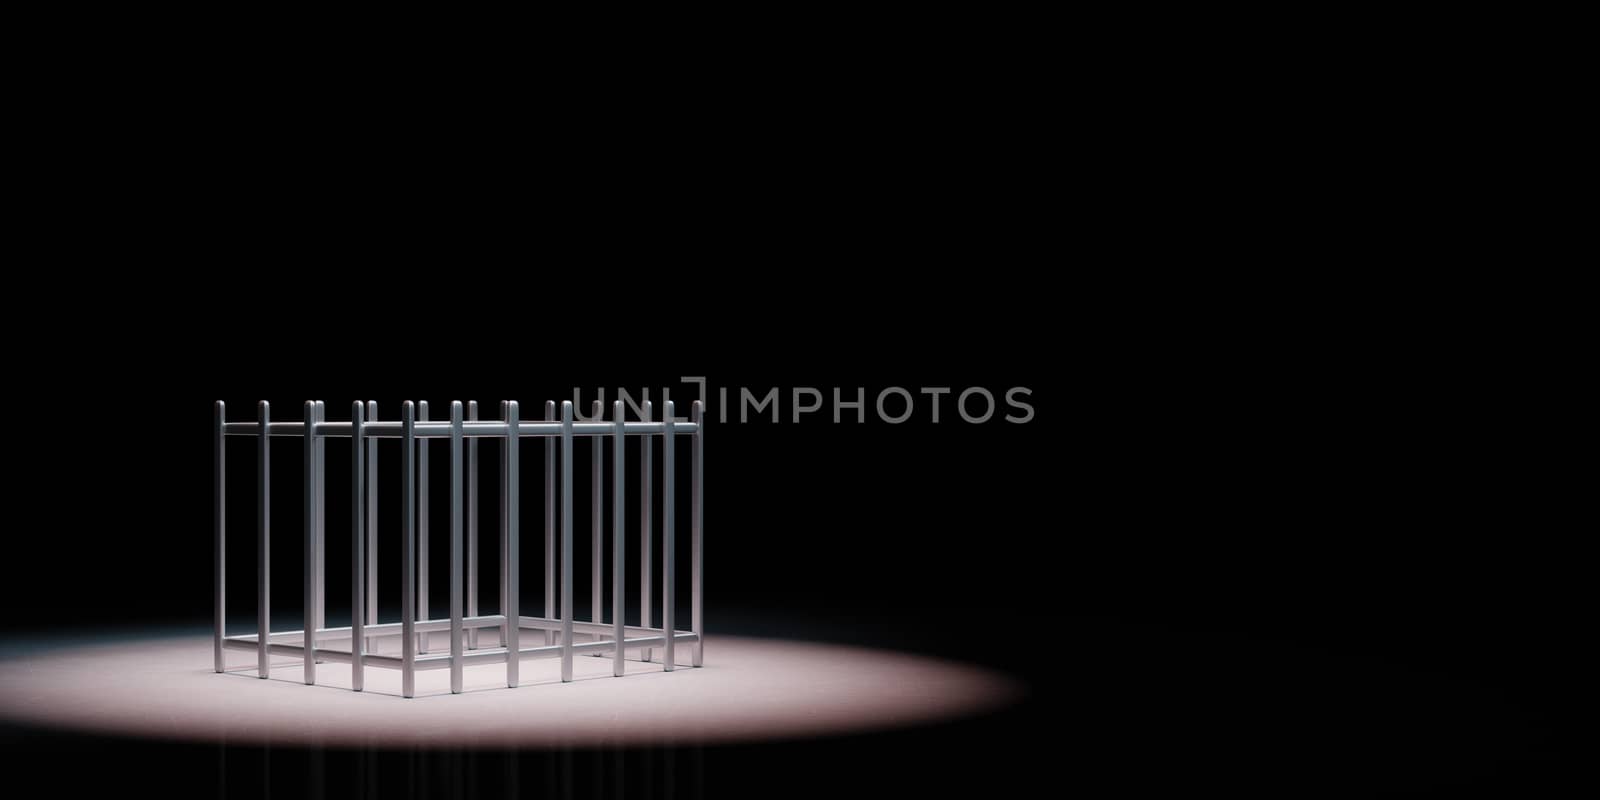 Iron Empty Cage Spotlighted on Black Background with Copy Space 3D Illustration